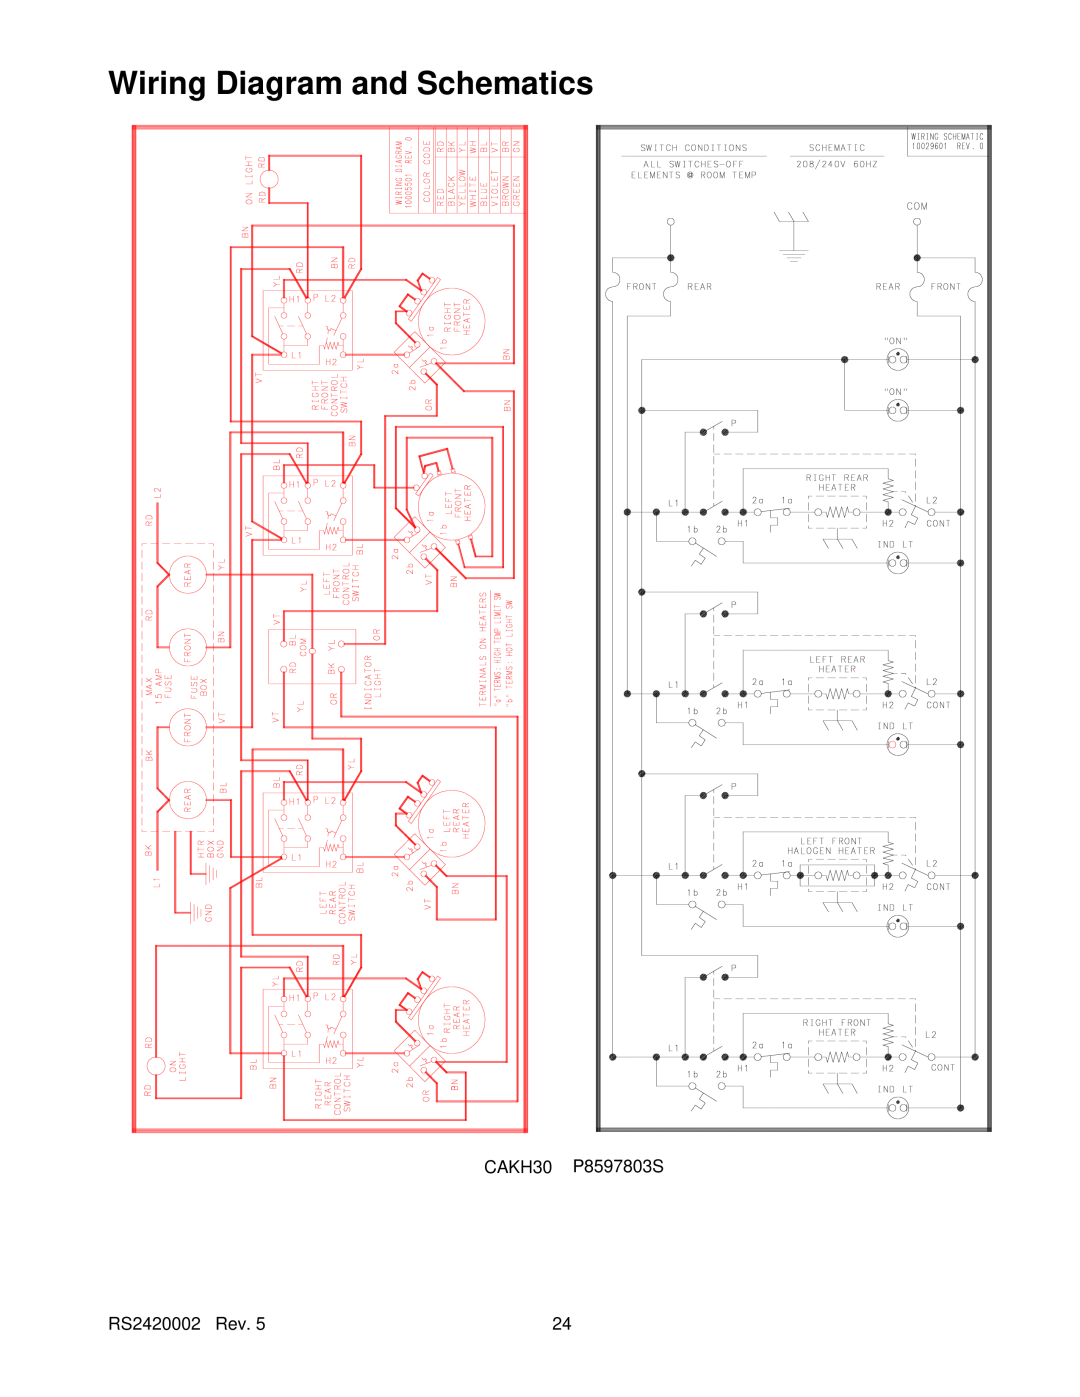 Amana AK2T30/36E1/W1, AK2H30, AK2H36E2, AK2HW2 service manual Wiring Diagram and Schematics, CAKH30 P8597803S, RS2420002 Rev 